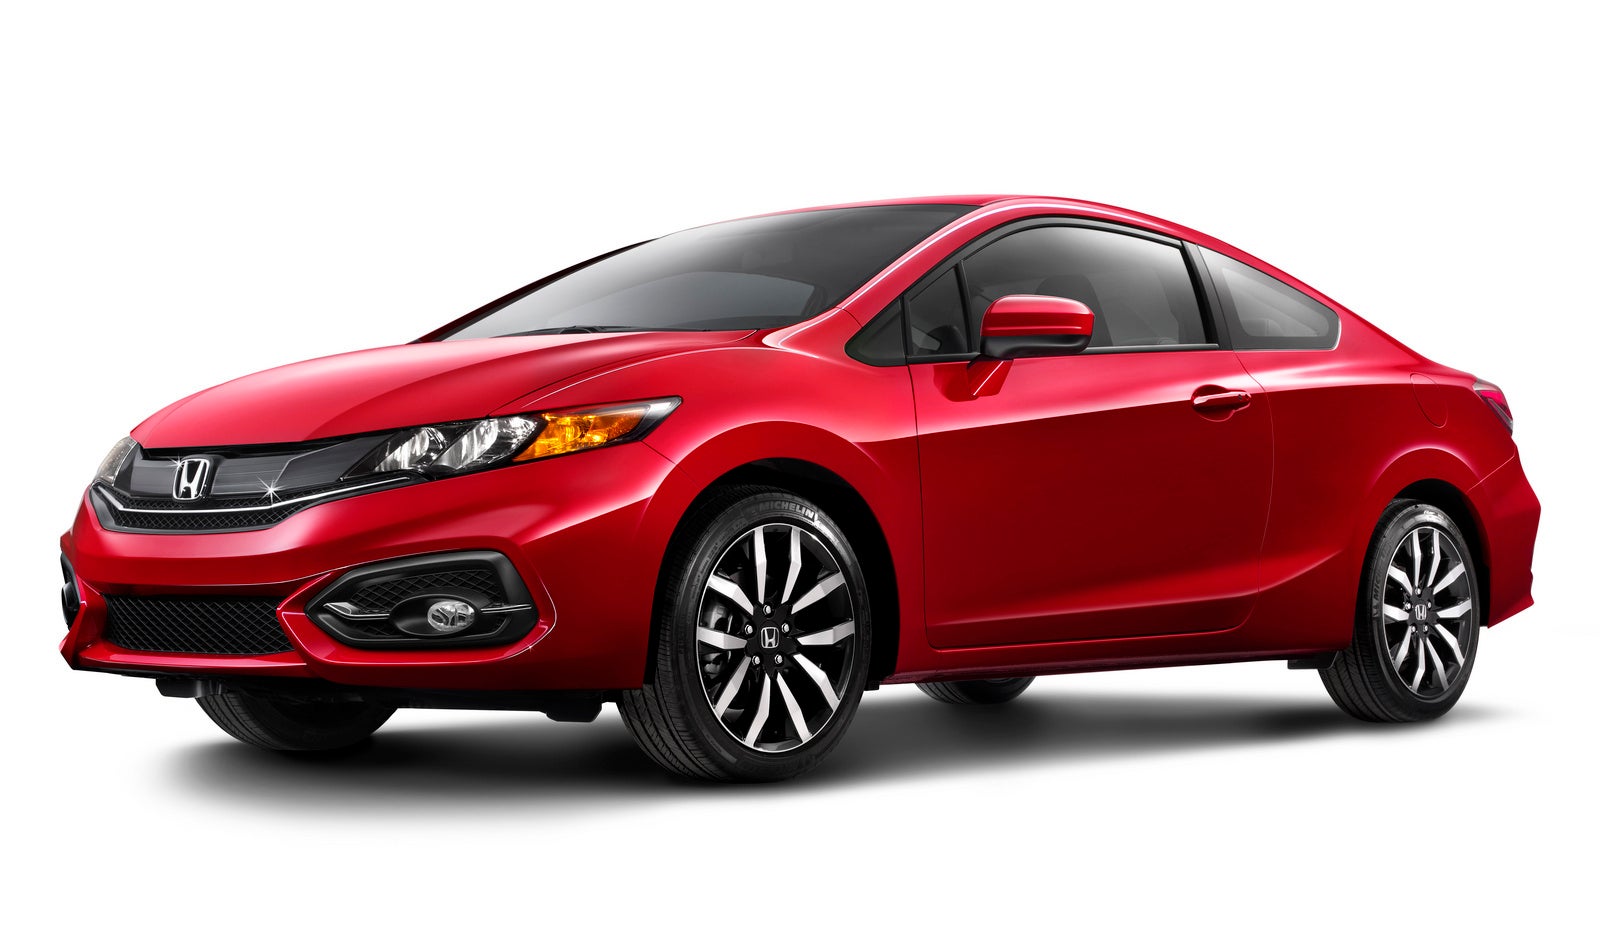 2014 Honda Civic Coupe Test Drive Review - CarGurus